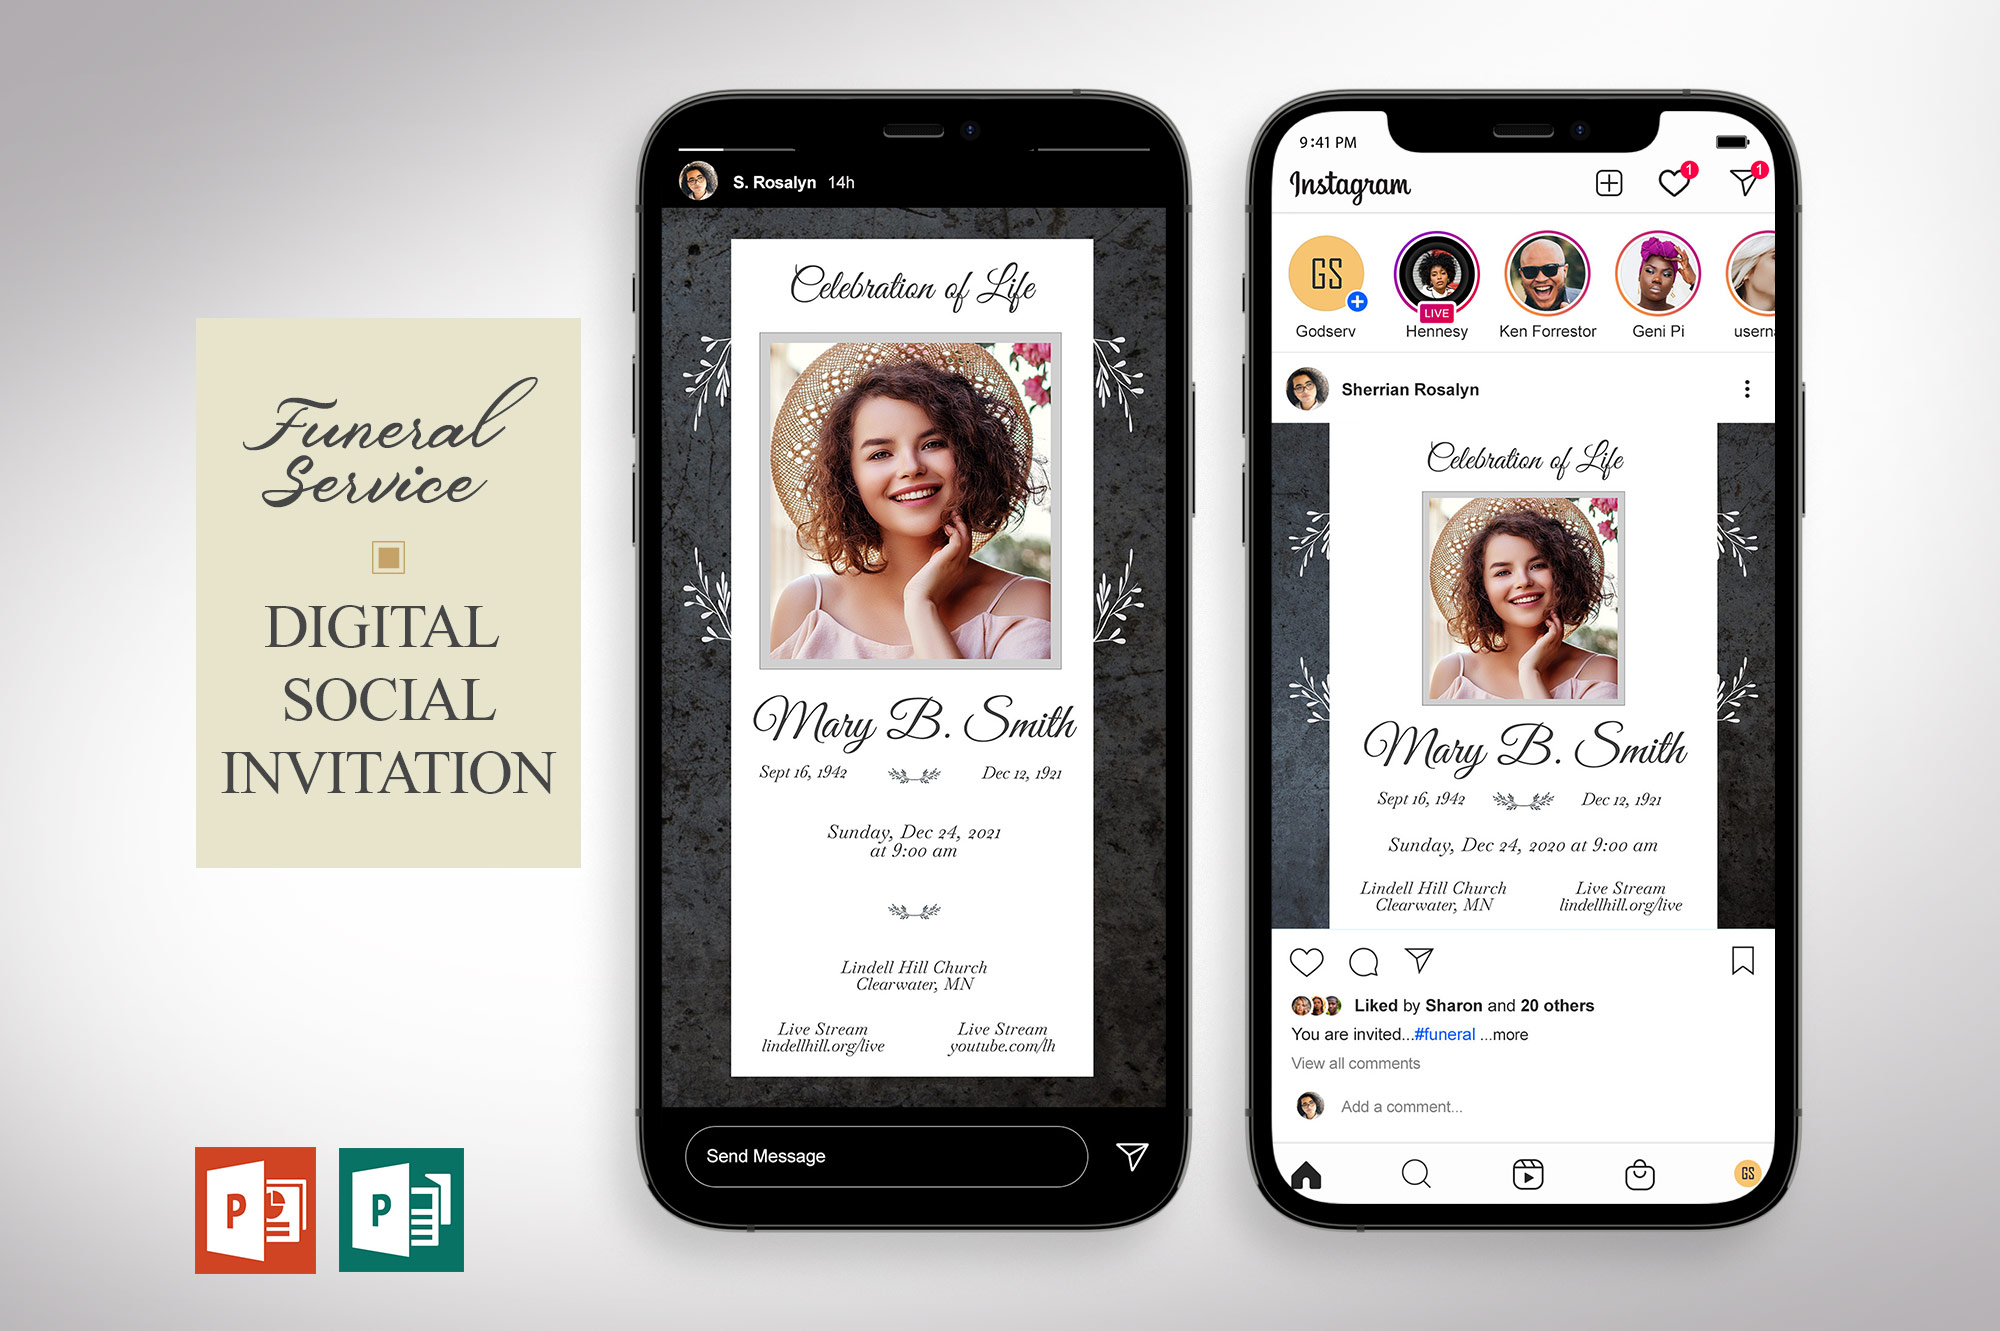 Graystone Funeral Digital Invitation PowerPoint Publisher Template | 2 Sizes | 1080x1080 Pixels (square) and 1080x1920 Pixels